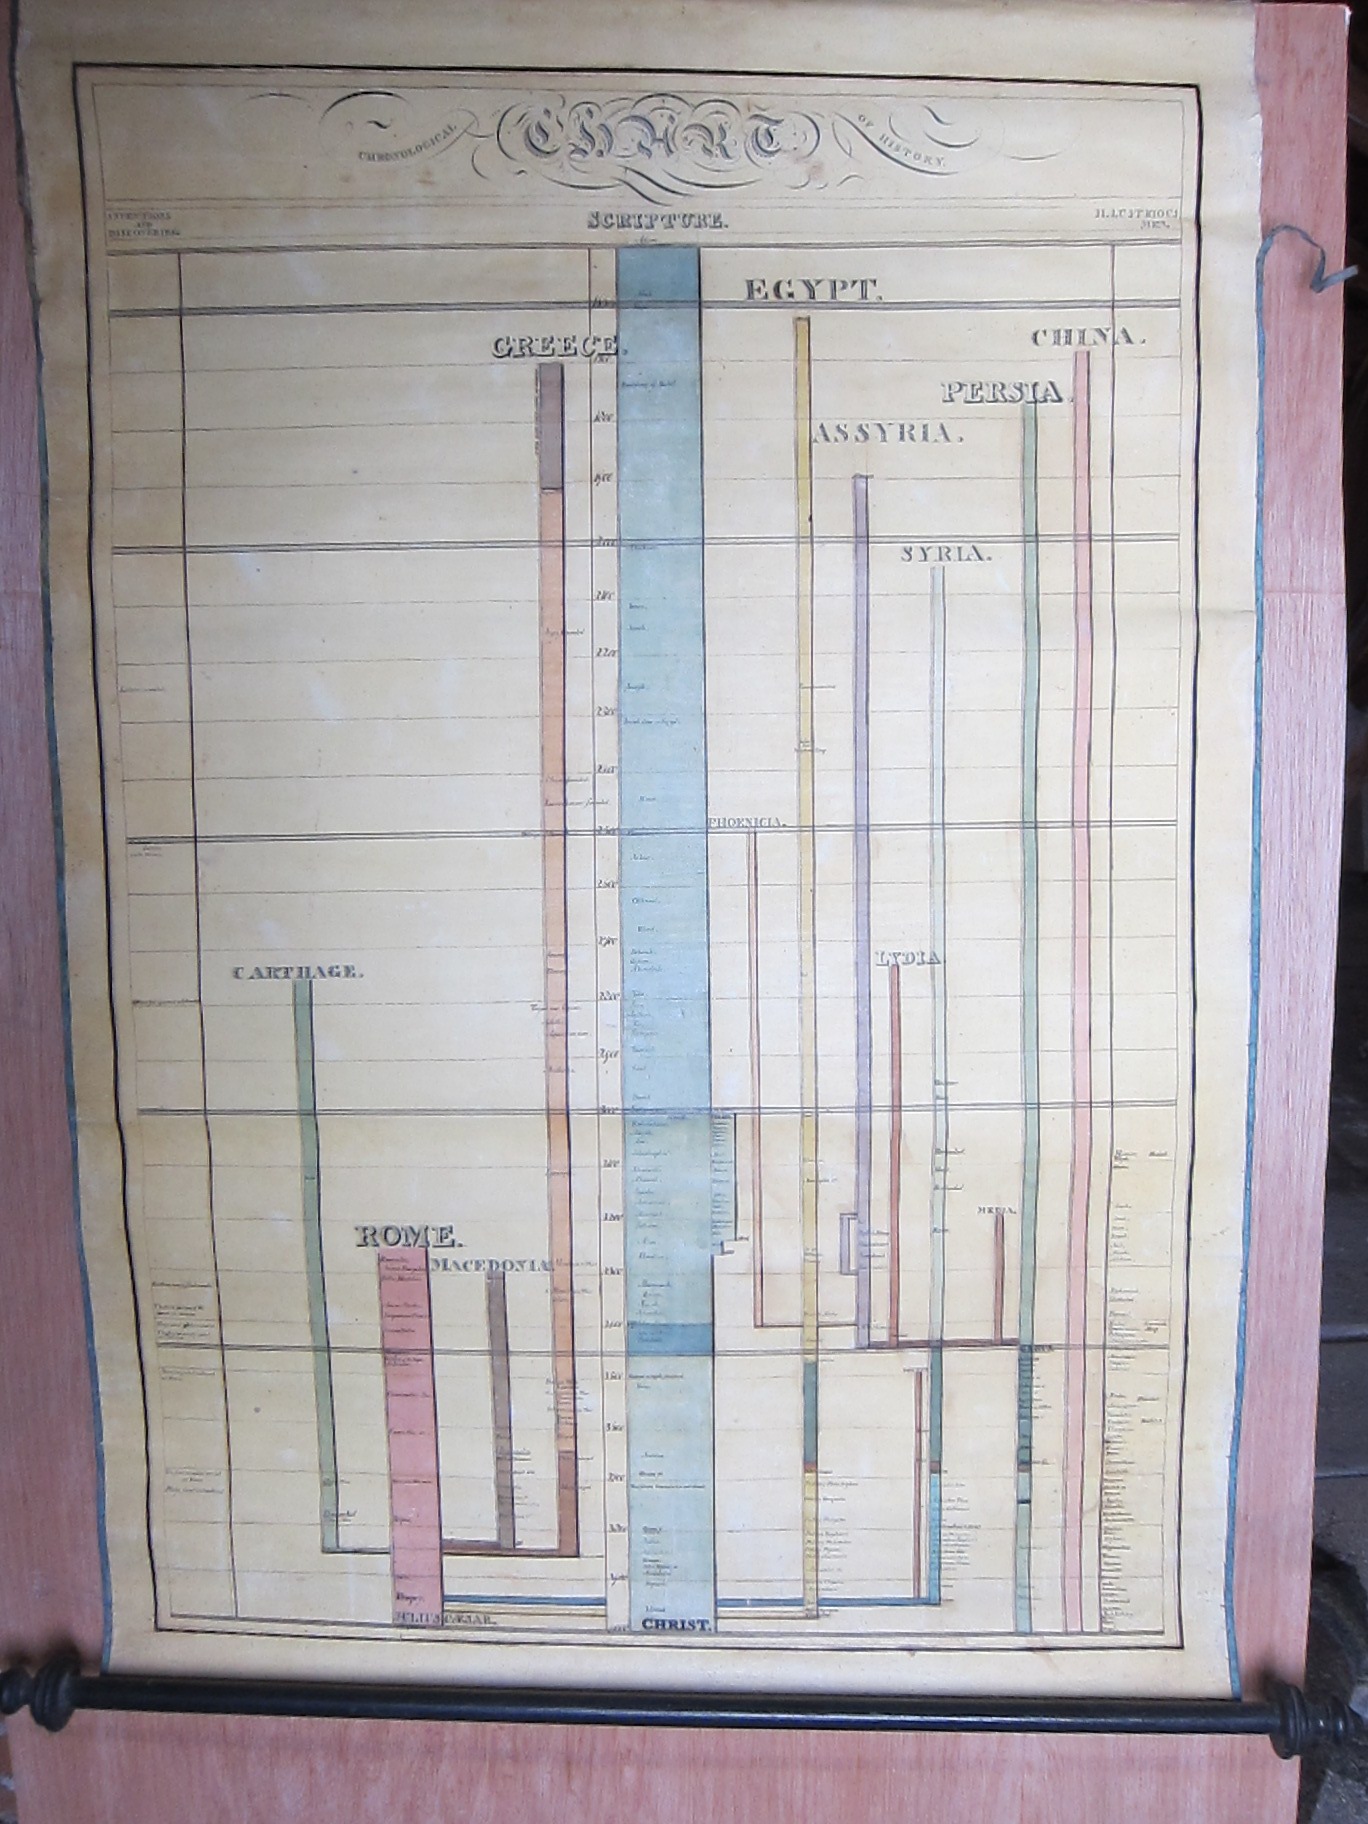 OLD USE UPDATED BELOW: A black and white faded photograph of one of Clarke’s charts, which shows signs of wear indicated by ripped, deteriorated edges and the occasional hole in the paper. The vertical timeline is made up of vacant or shaded-in rectangles of varying sizes surrounded by cursive captioning.